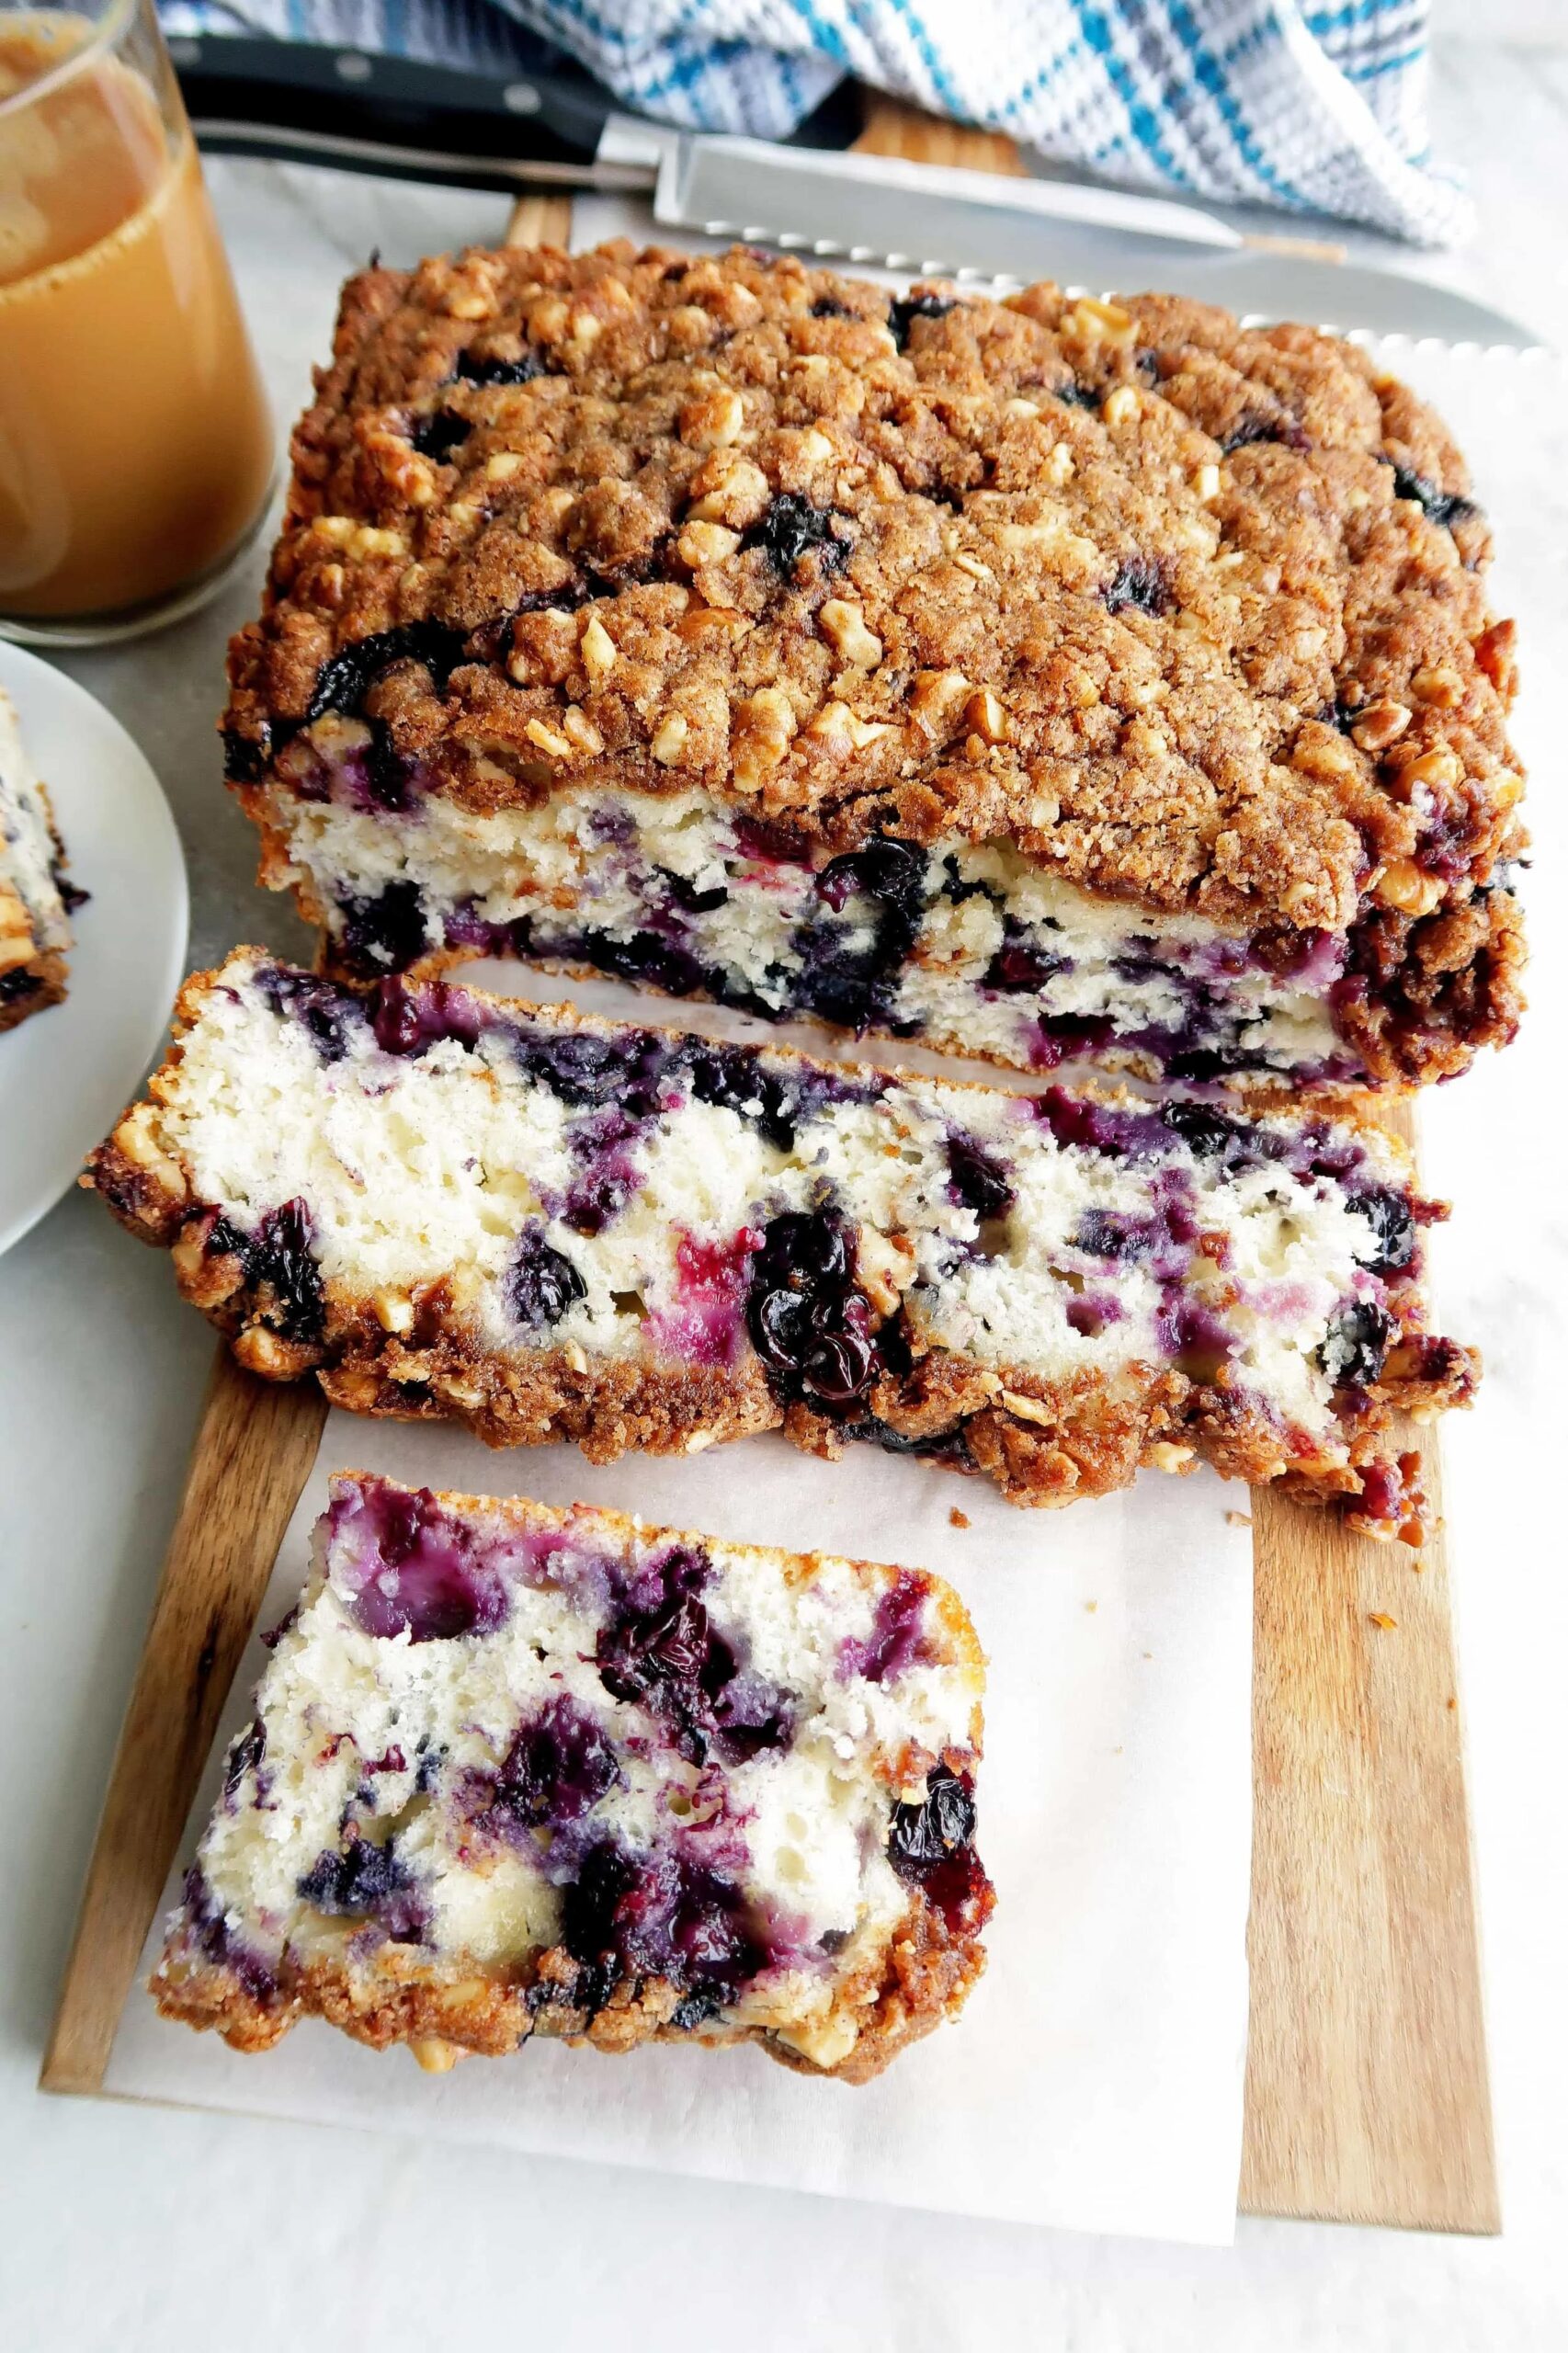  A slice of blueberry coffee cake is the perfect way to start your morning.